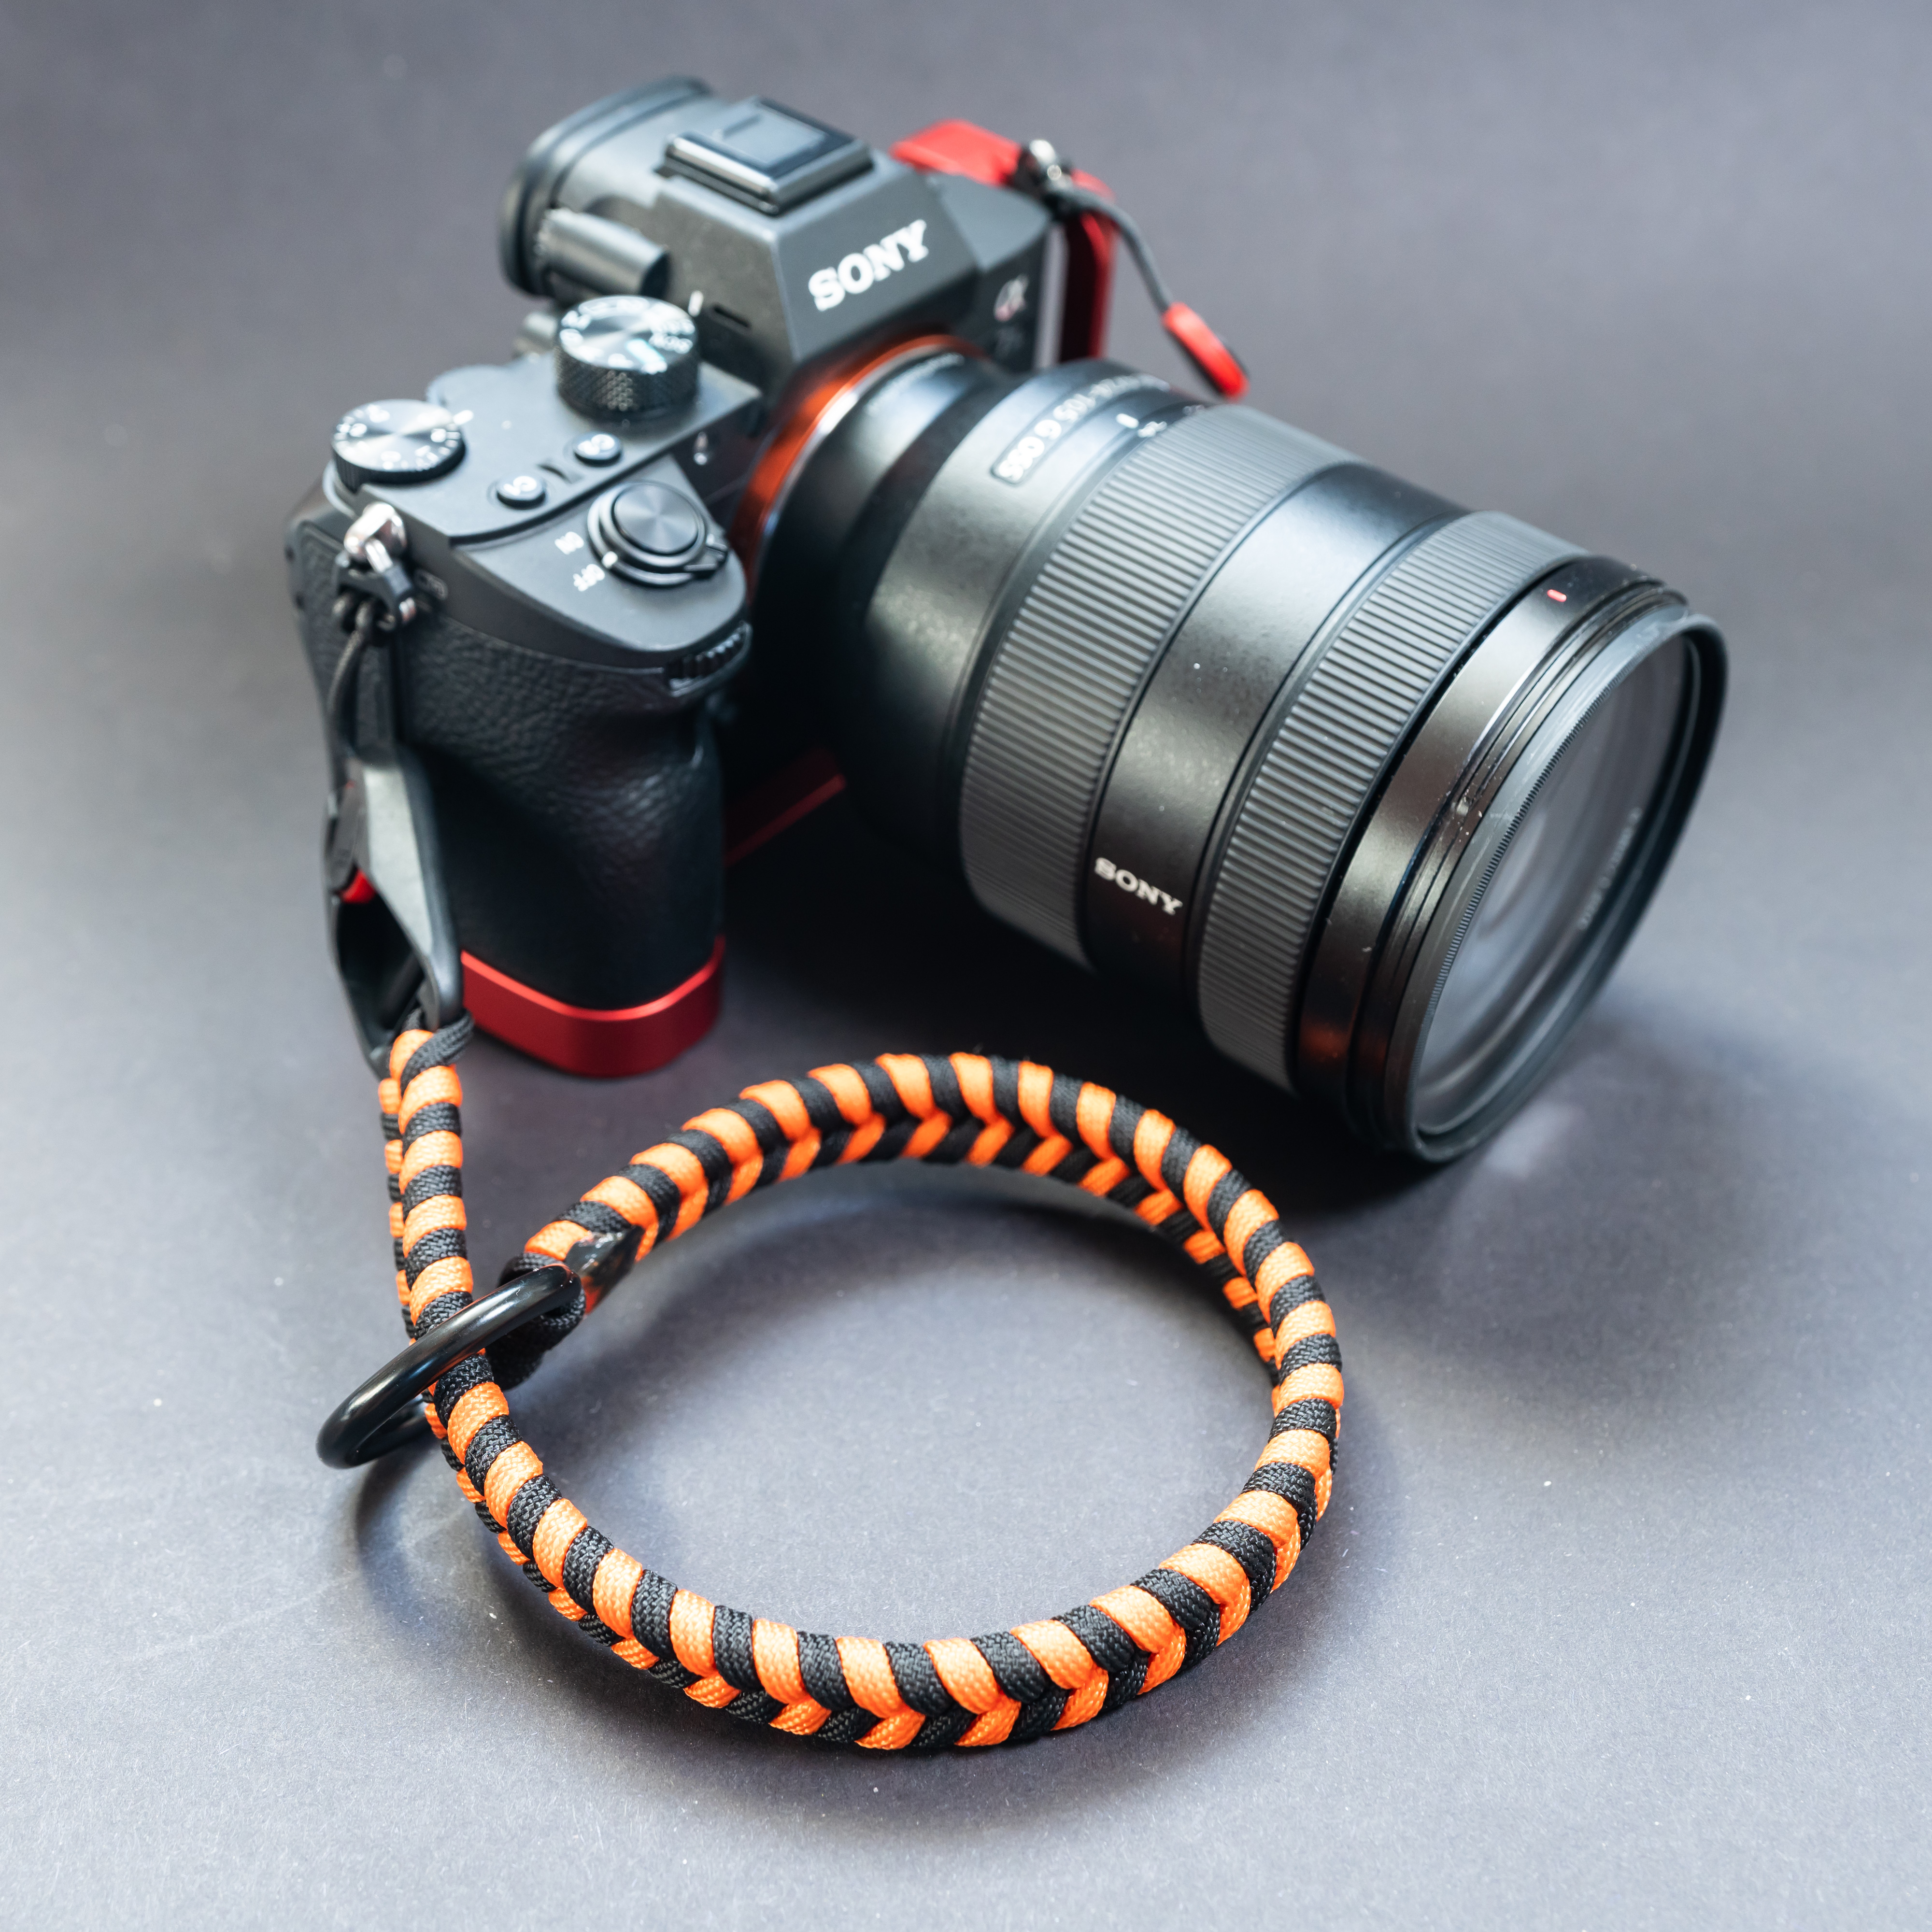 Double Color - Paracord Camera Wrist Strap with Peak Design Links - Snake Straps